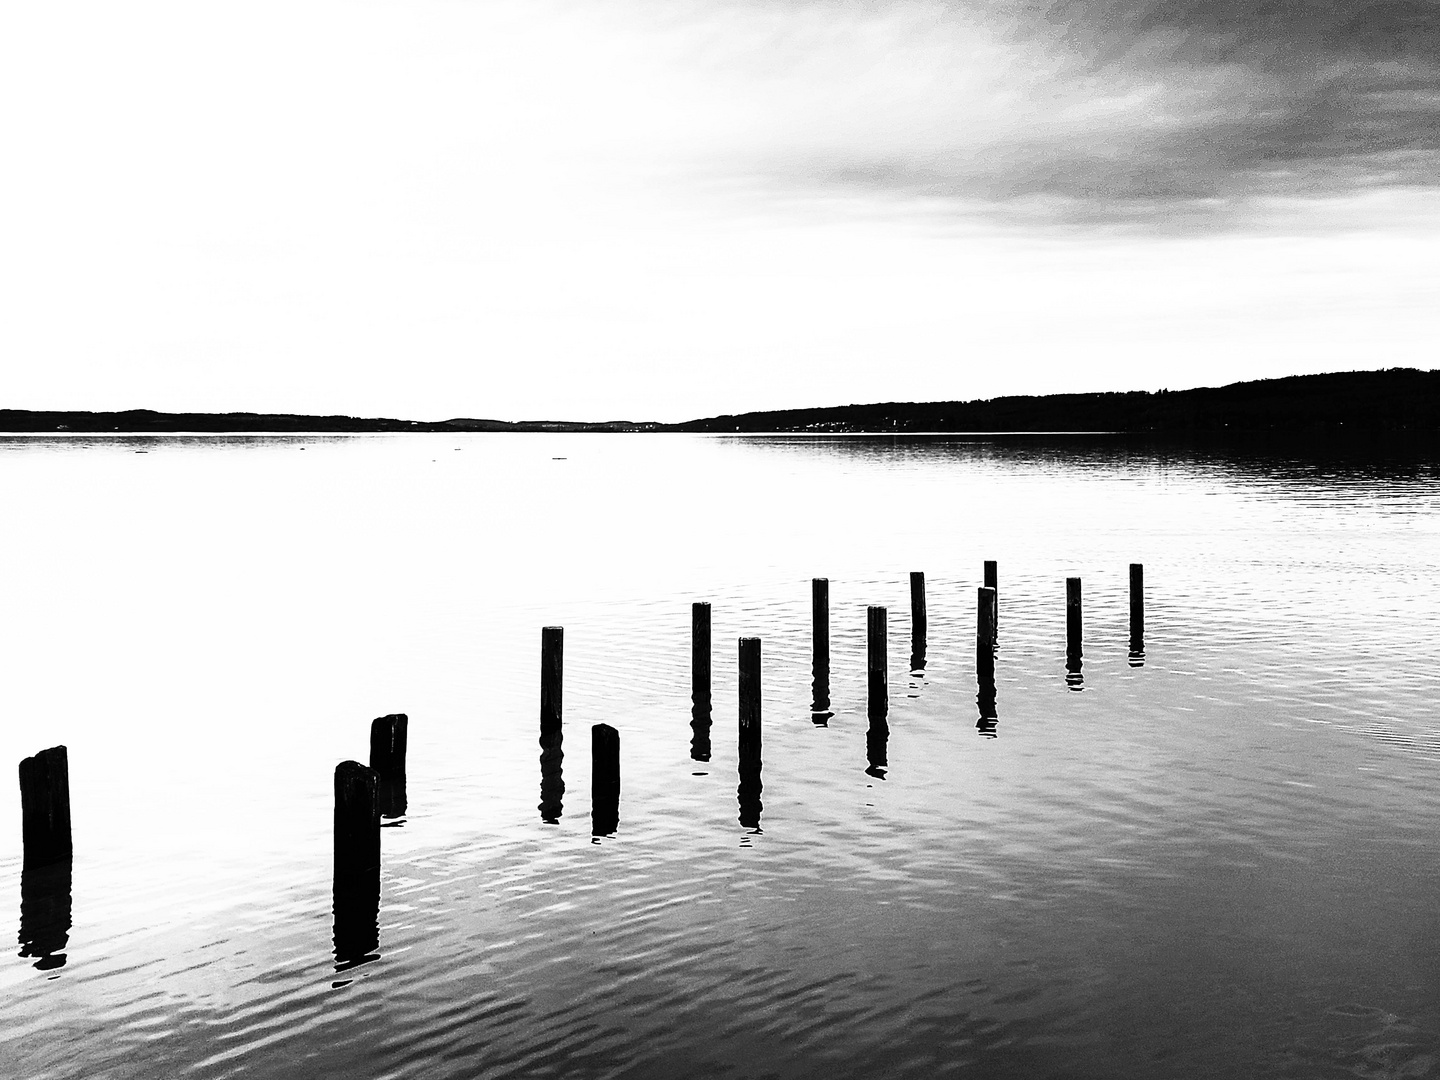 Am Ammersee